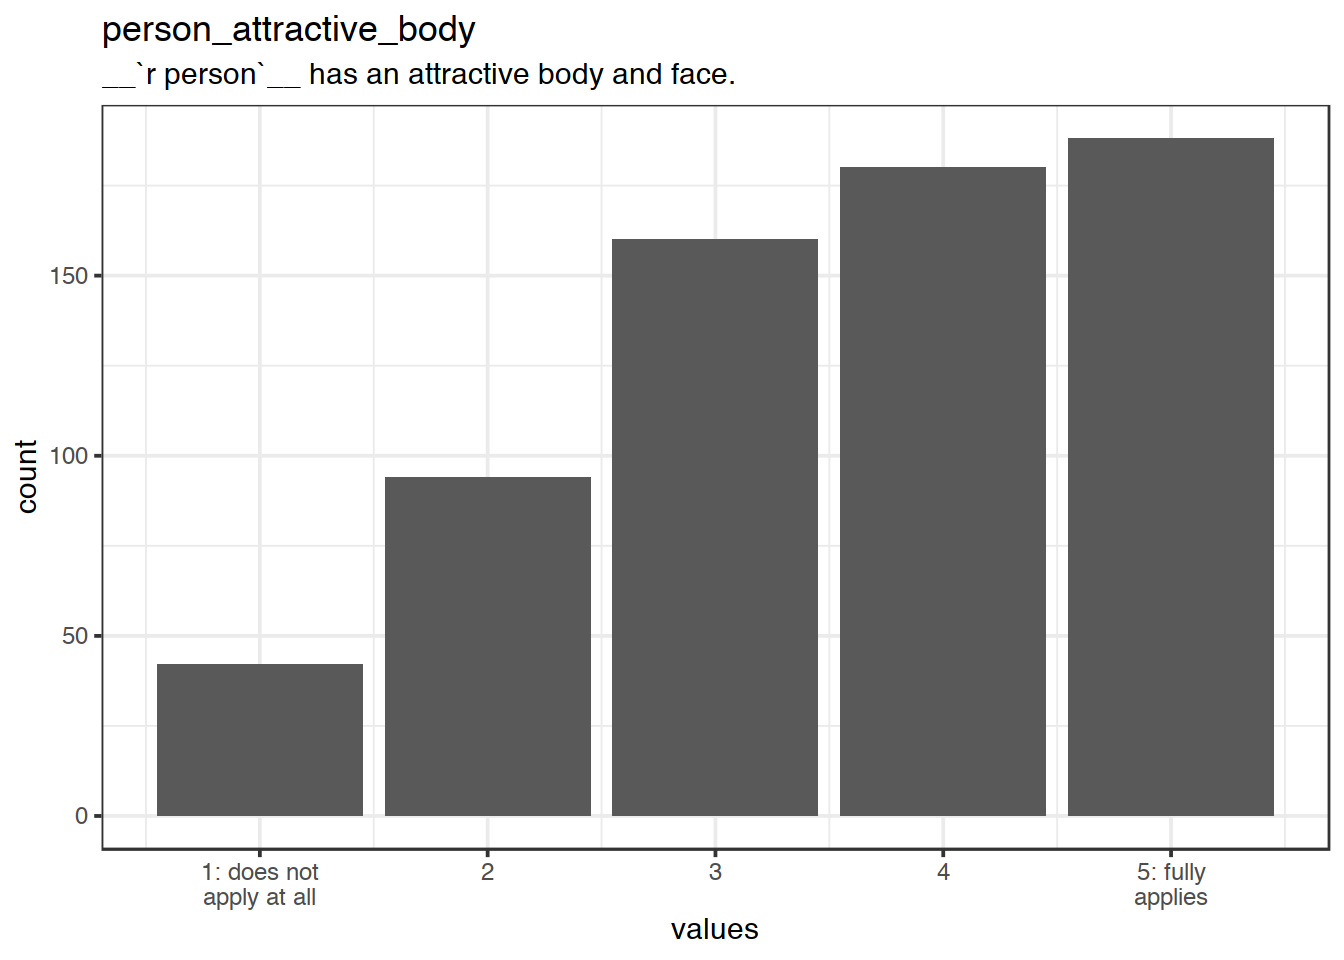 Distribution of values for person_attractive_body